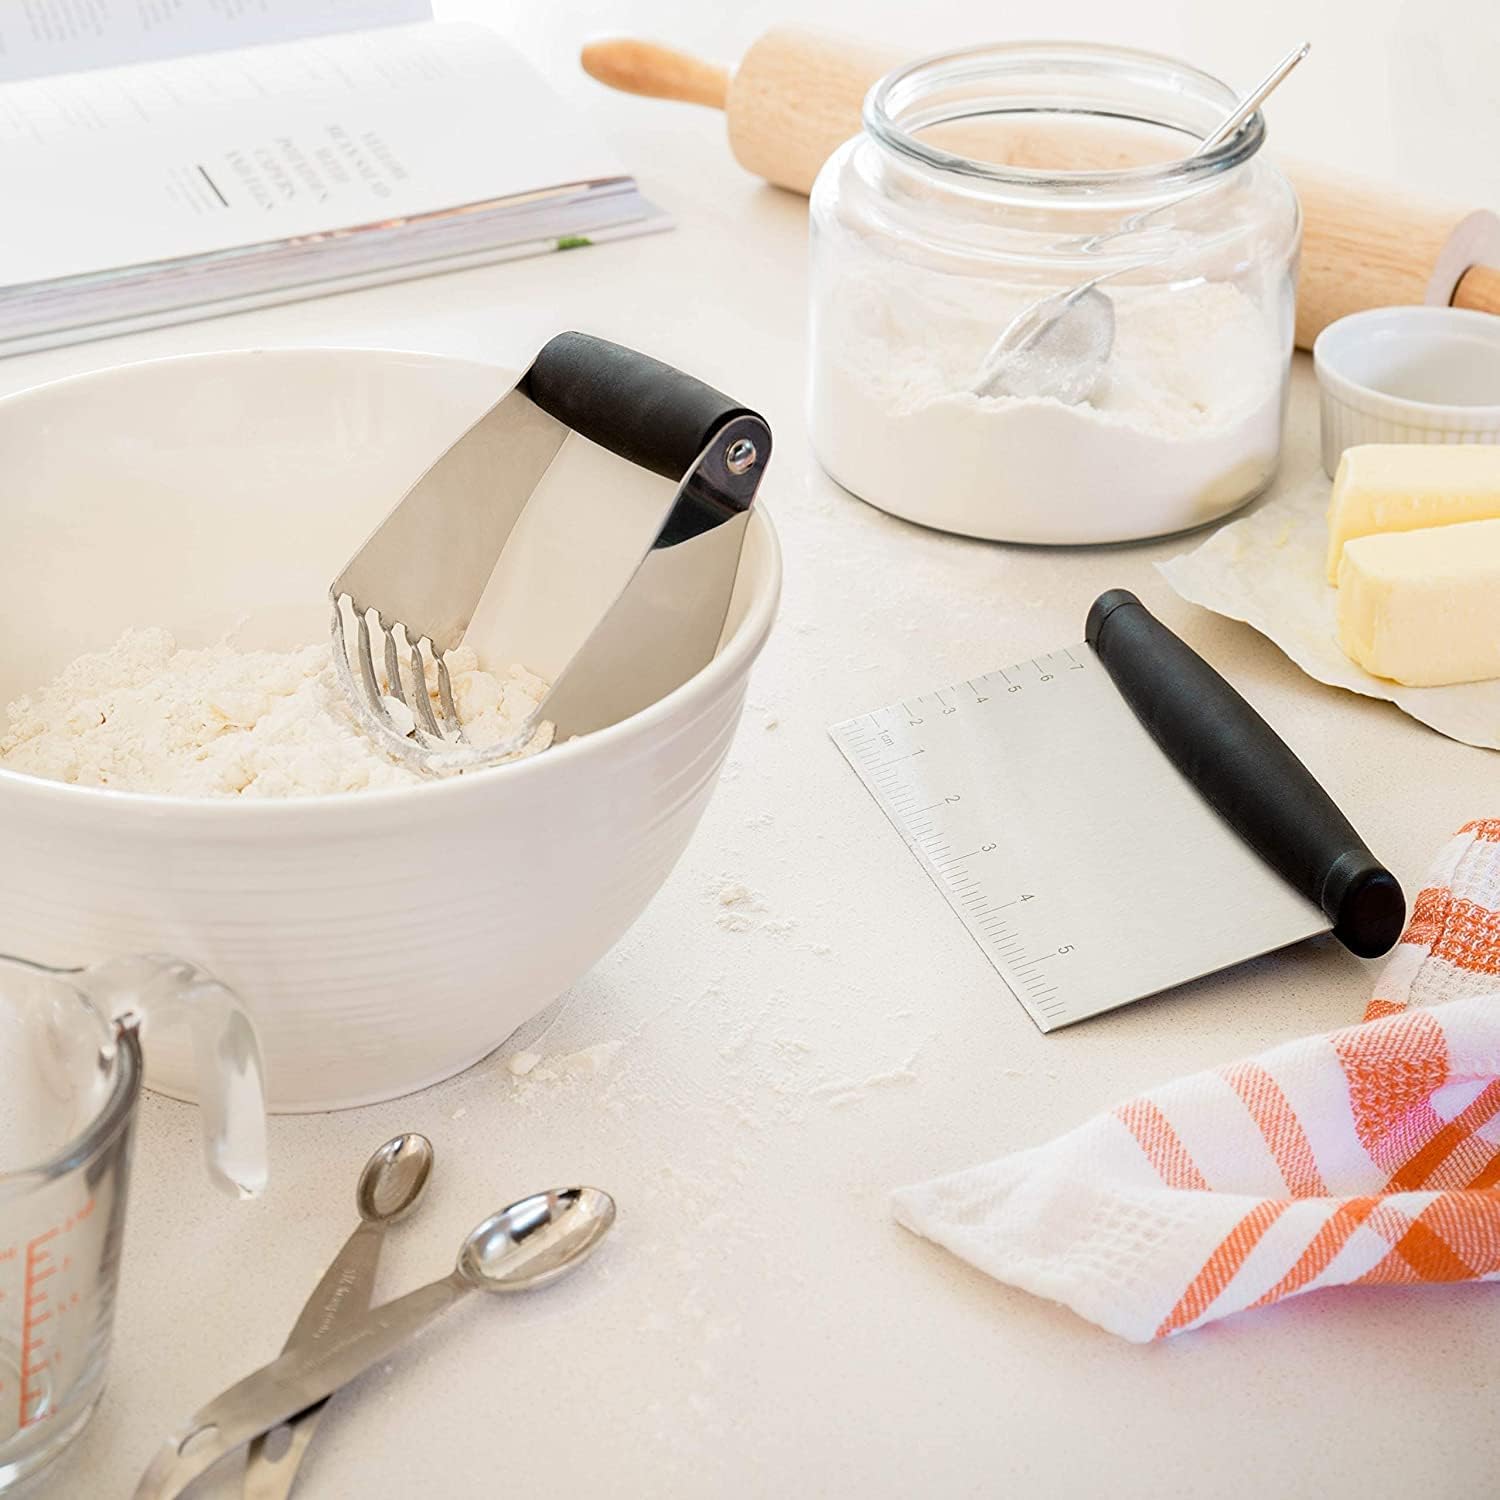 Dough Scraper: 8 Tools Under $10 That All Home Bakers Need